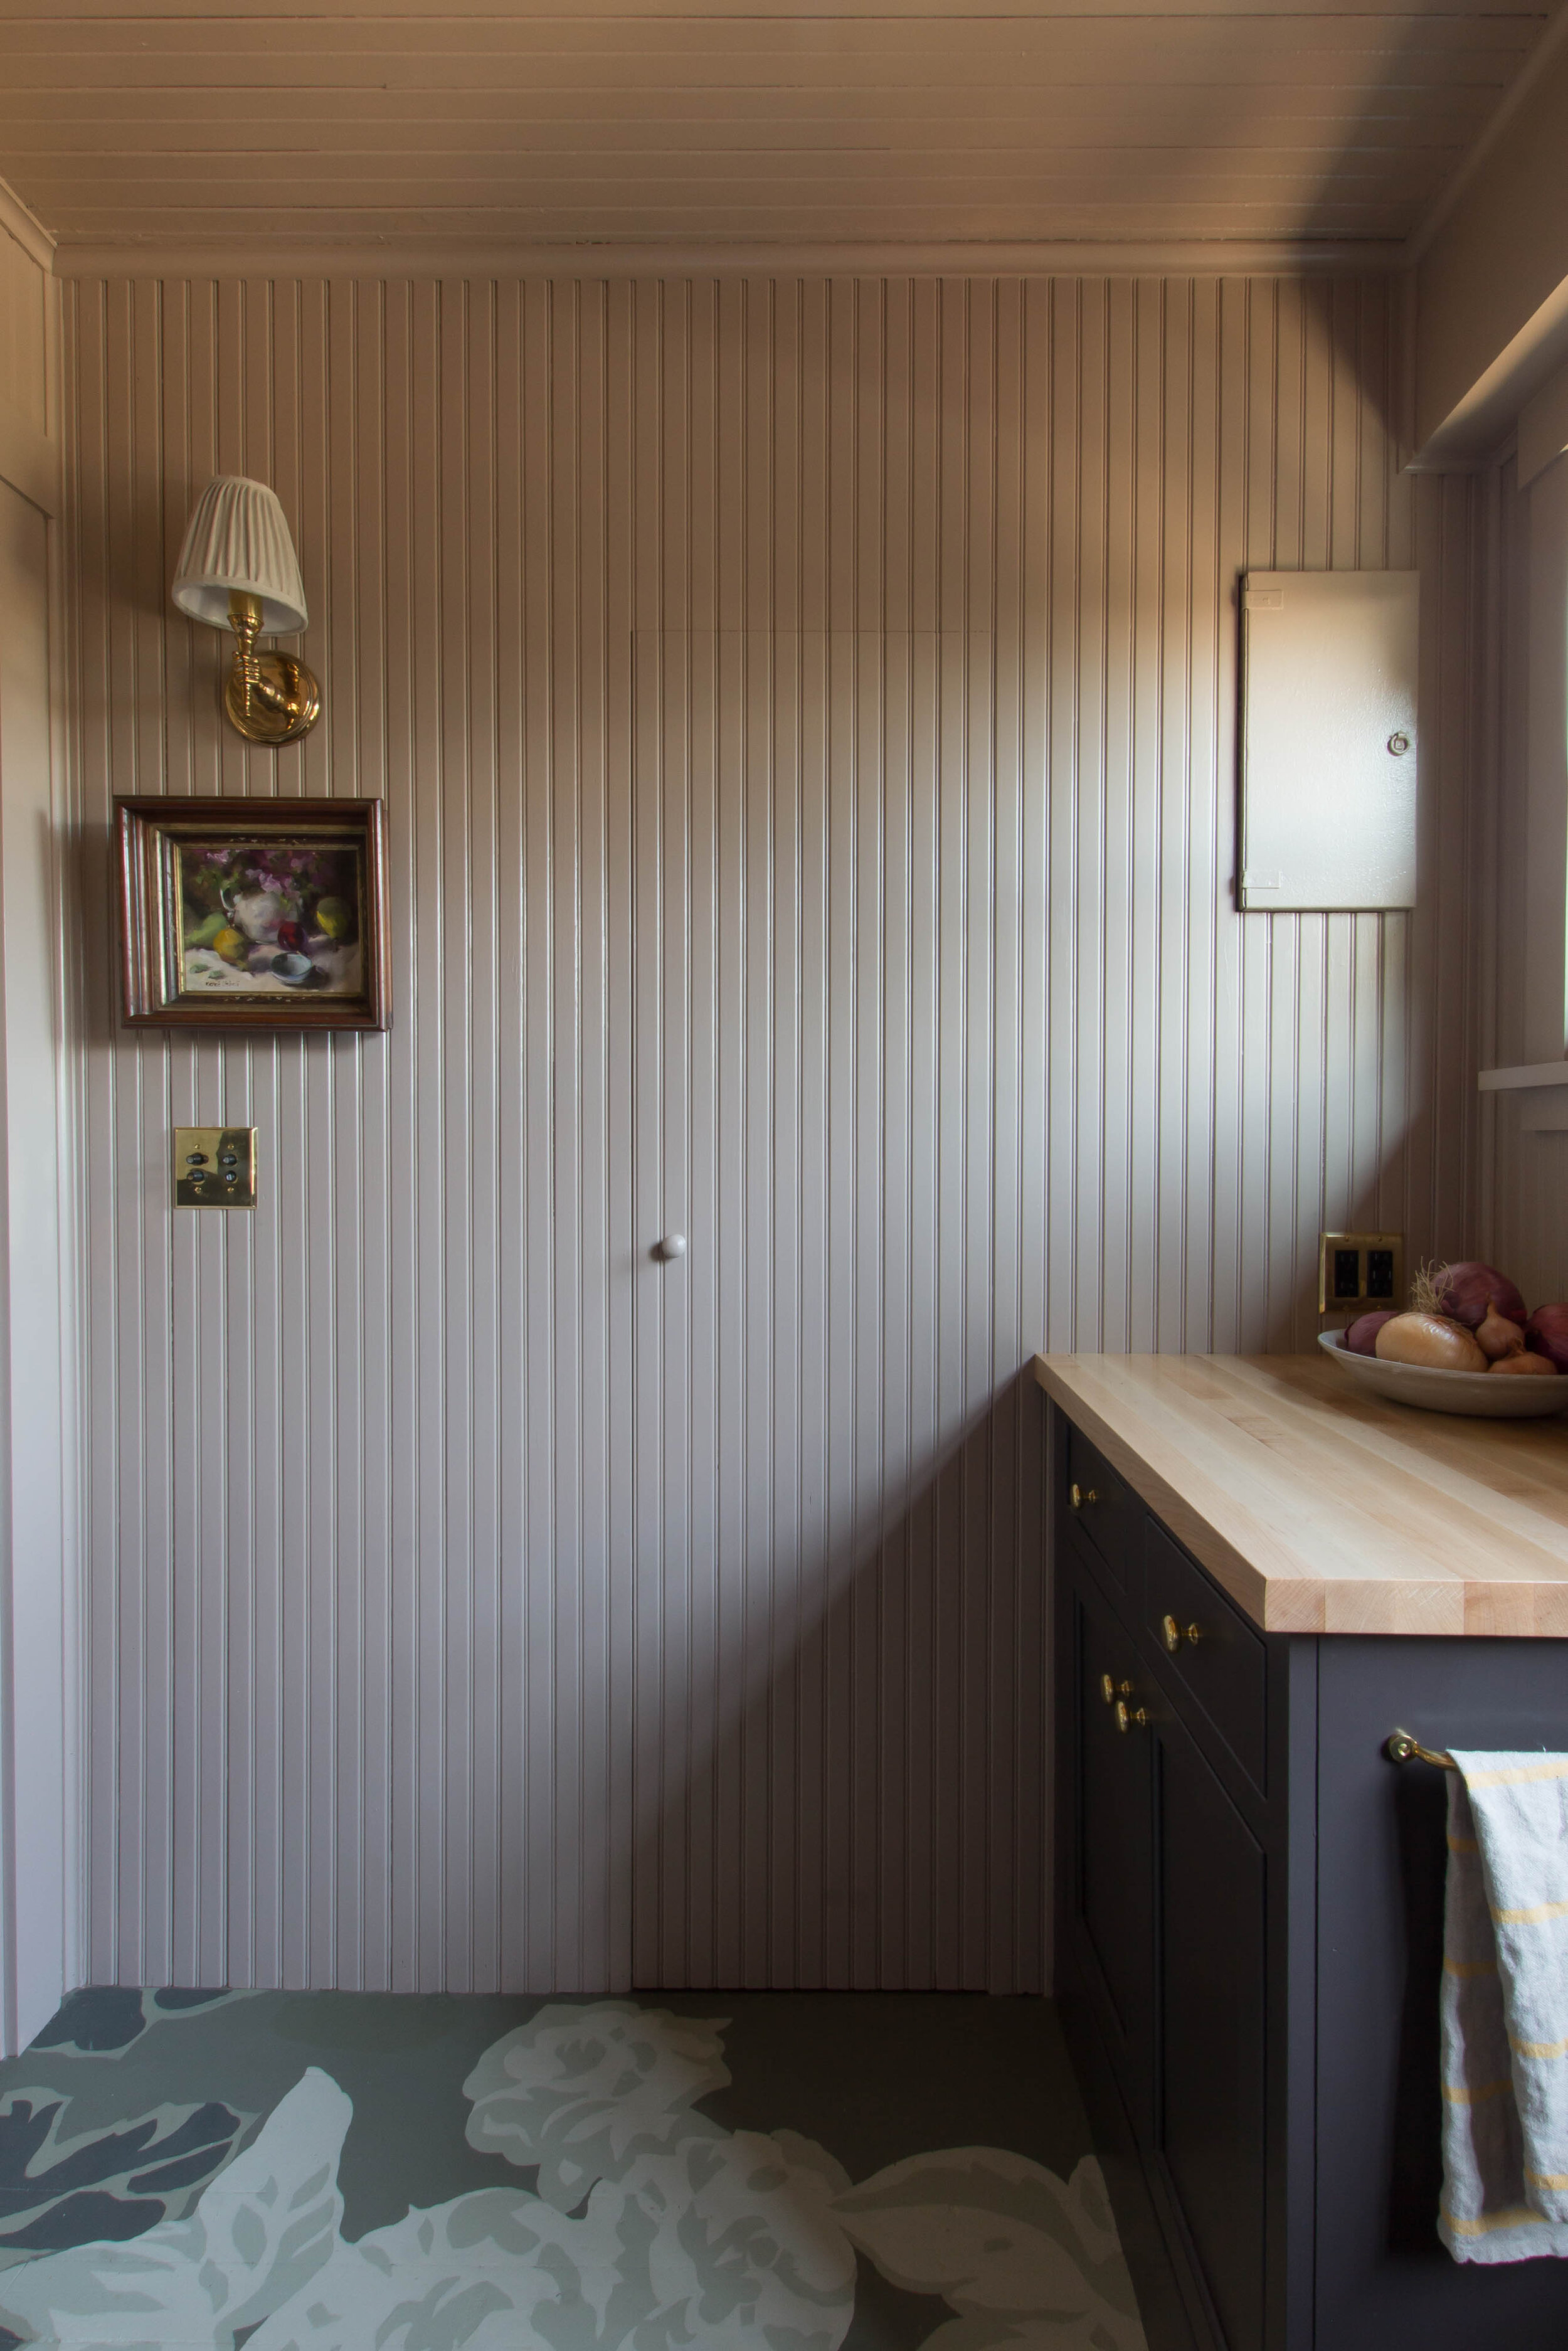  Seattle Scullery Designed by: Studio Laloc, Lauren L Caron - Photo by: Lauren L Caron © 2020  The beadboard wall paneling perfectly disguises the broom closet door 